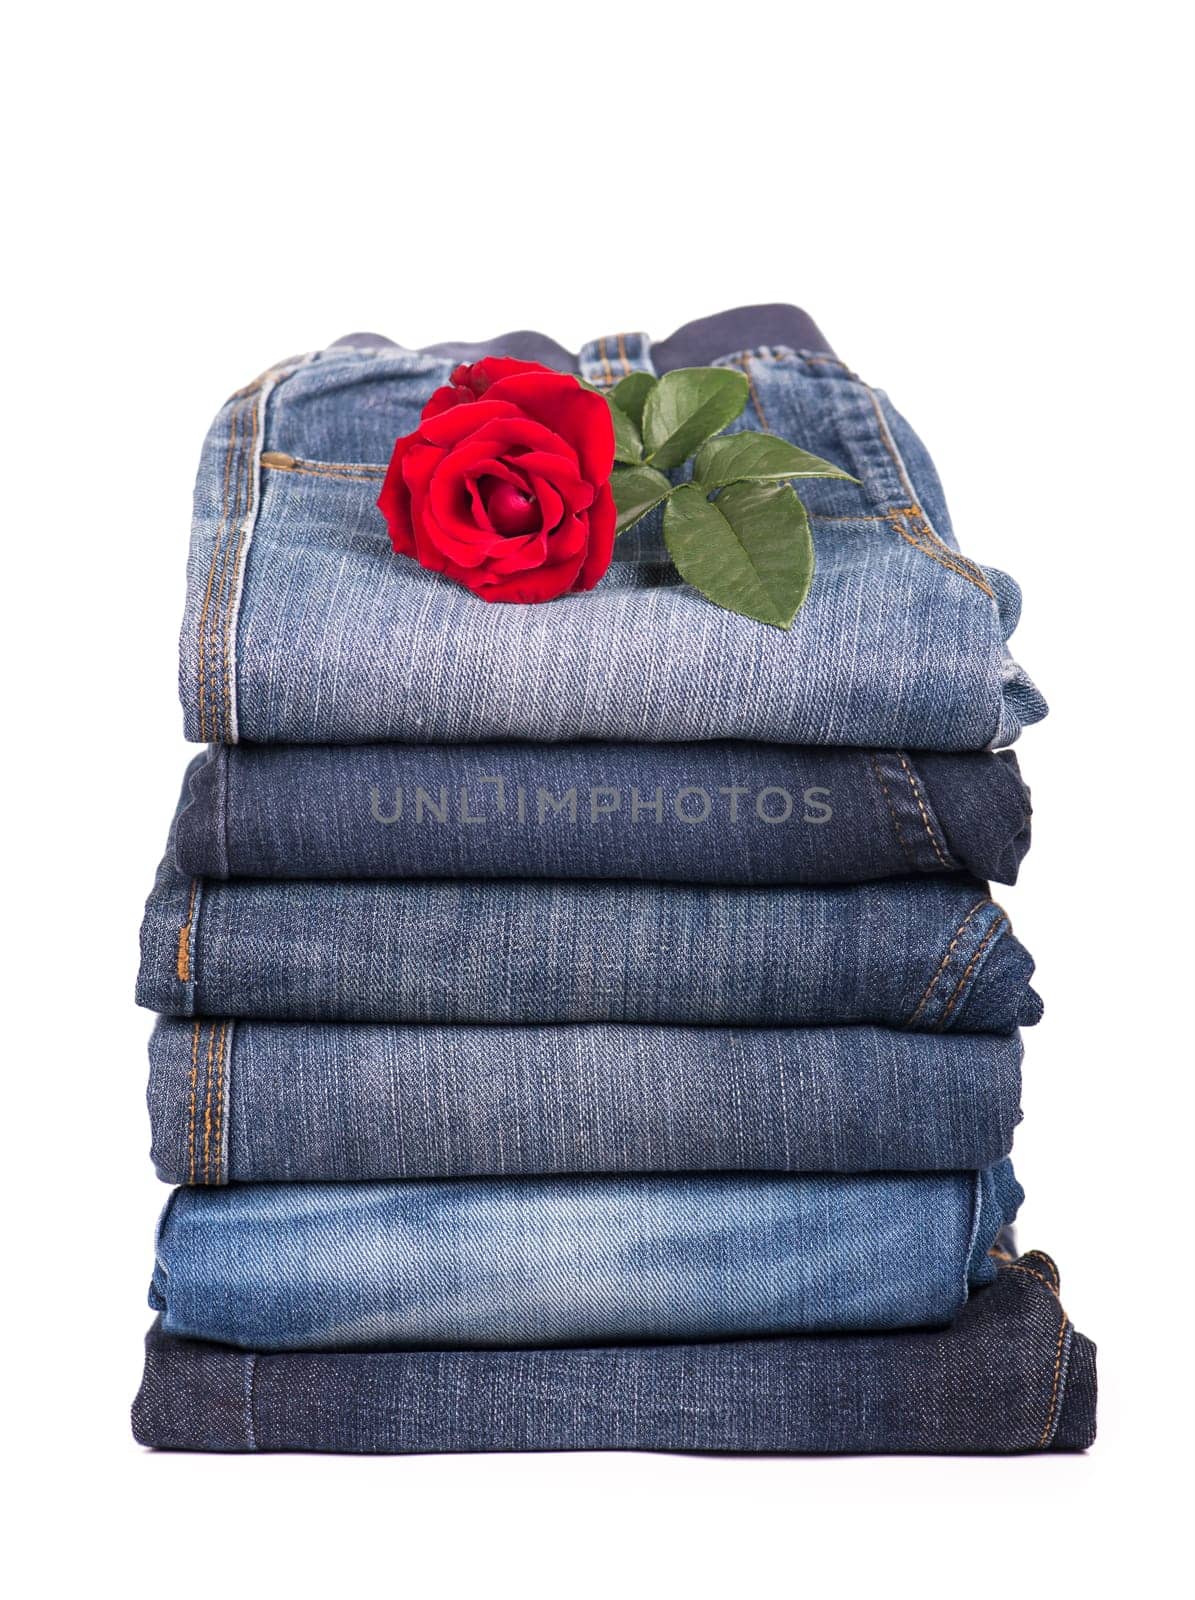 jeans clothes are put by a pile and a red rose on a white background